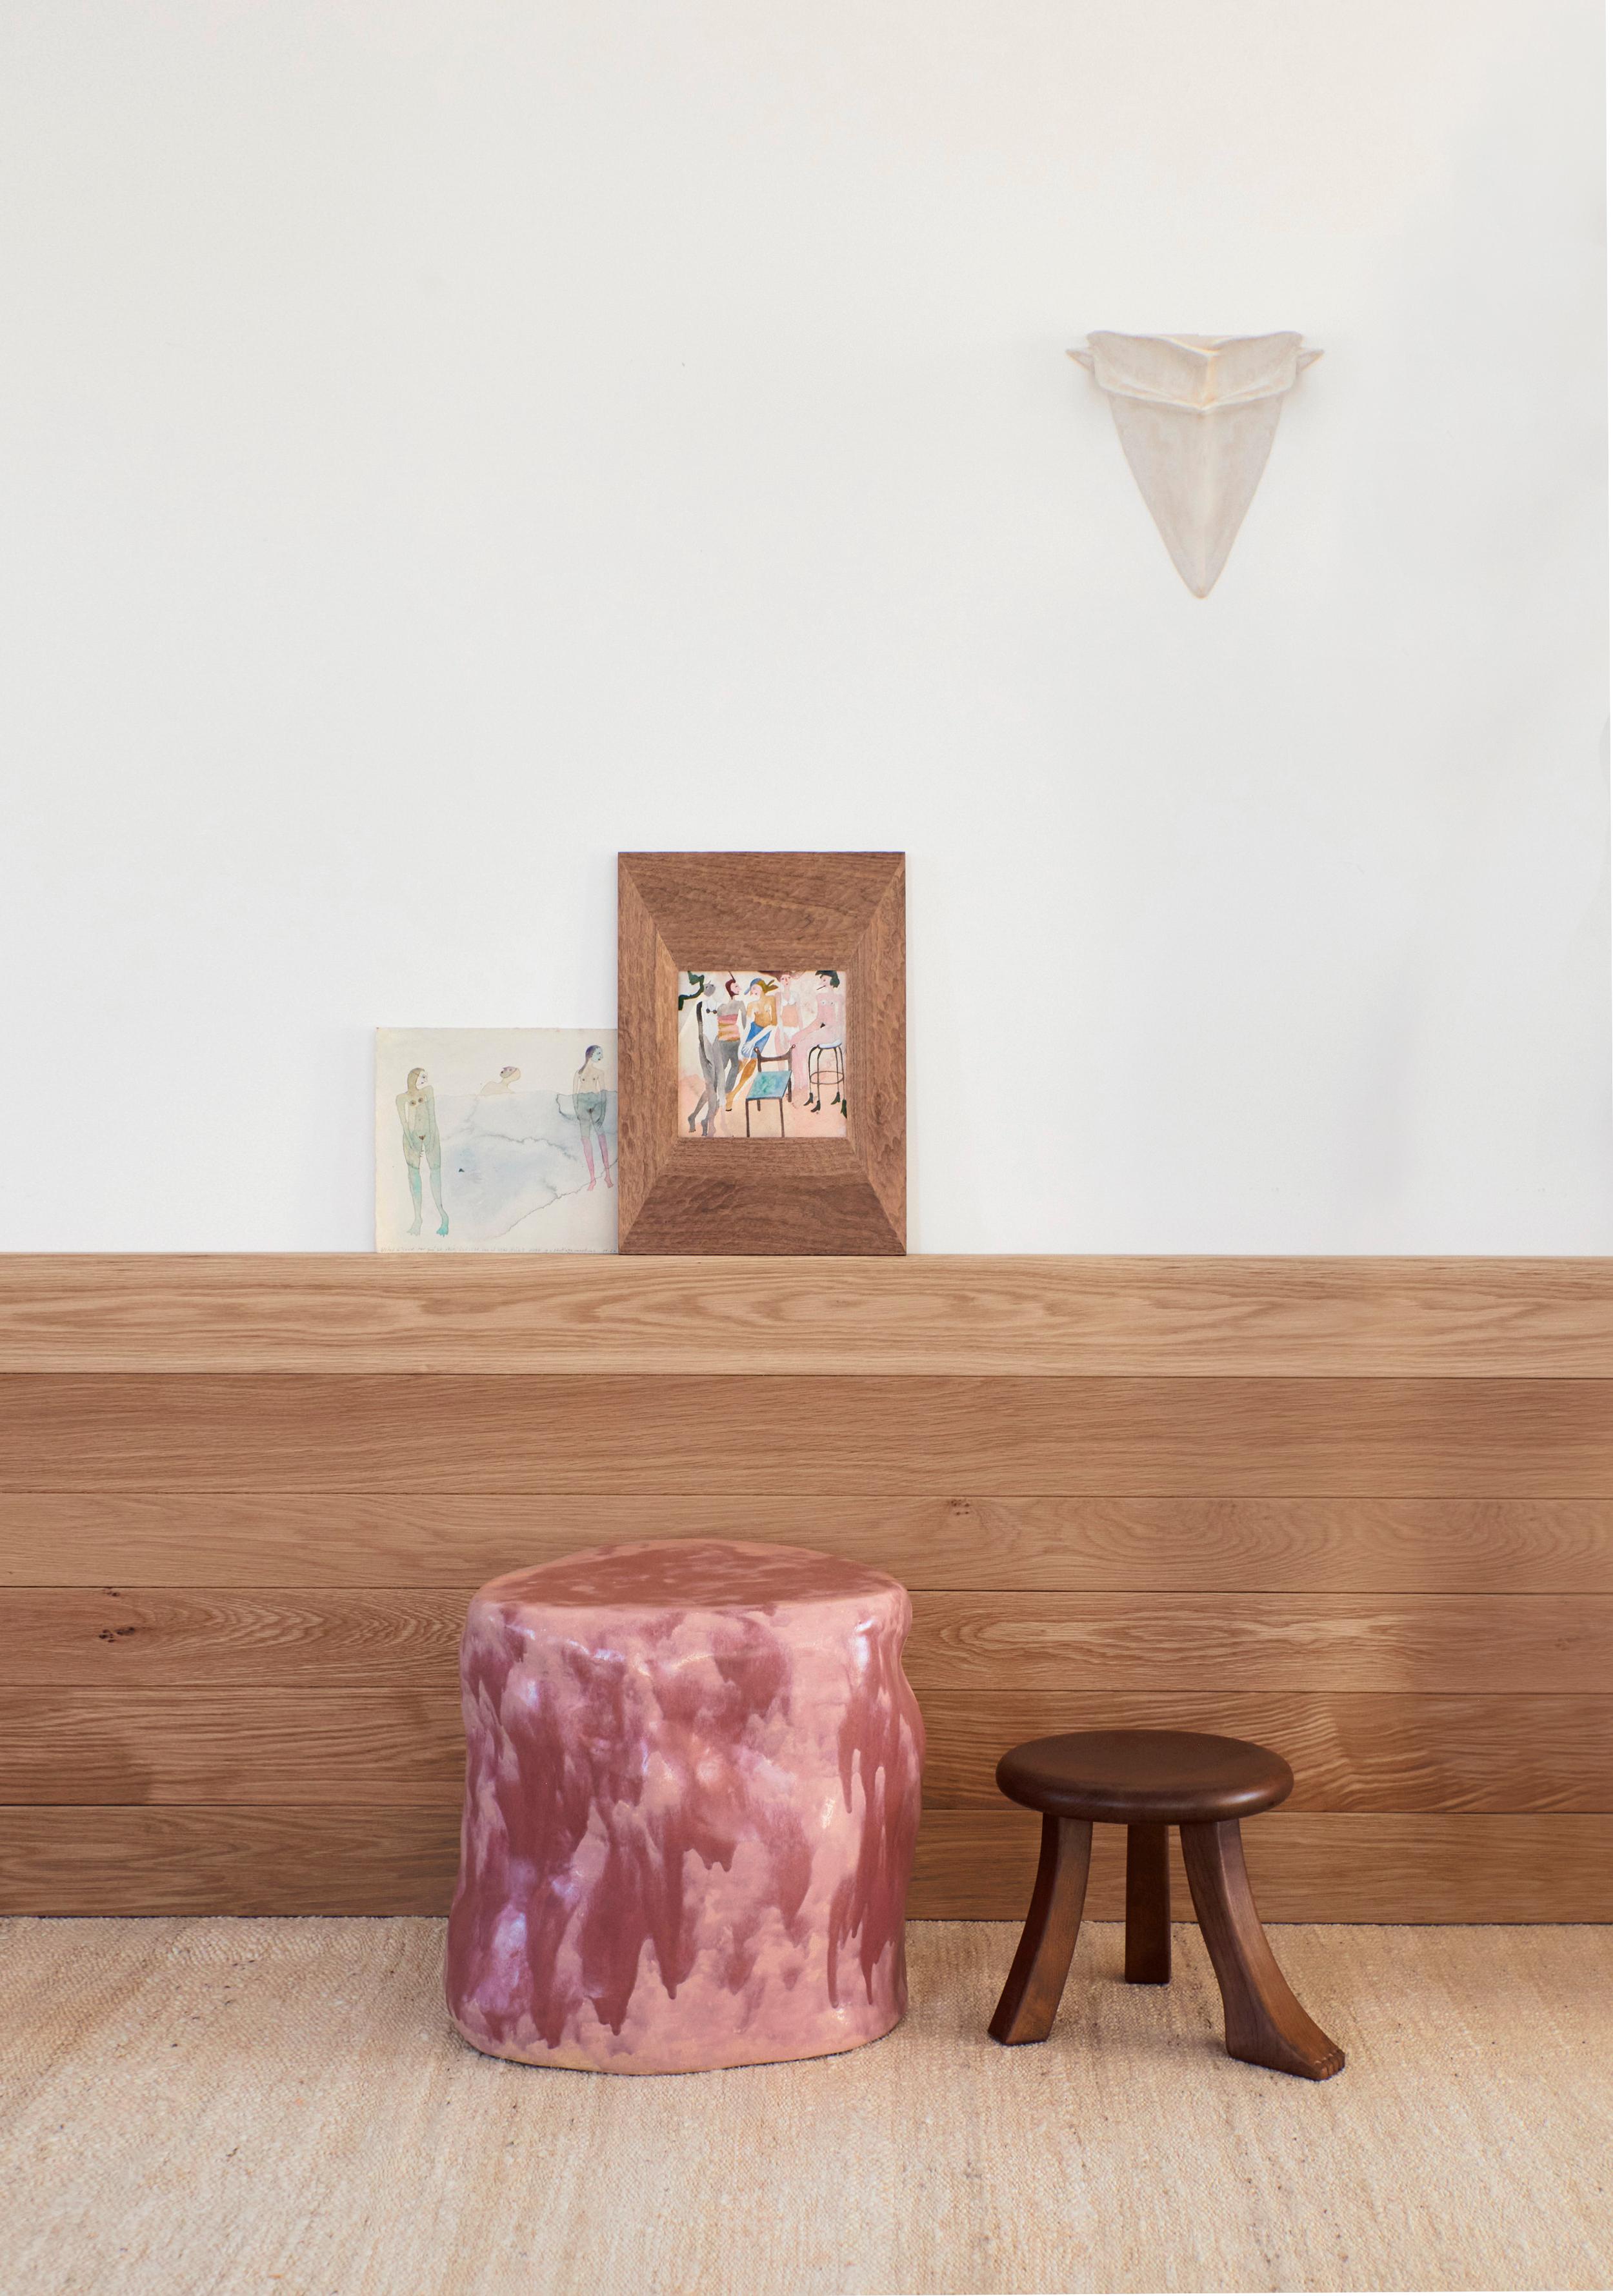 Large Ceramic Side Table in Dripped Pink
Designed by project 213A in 2023

The artisanal ceramic side tables have been created in-house and are a result of exploring traditional shapes with a playful twist on proportions and texture.
Each side table